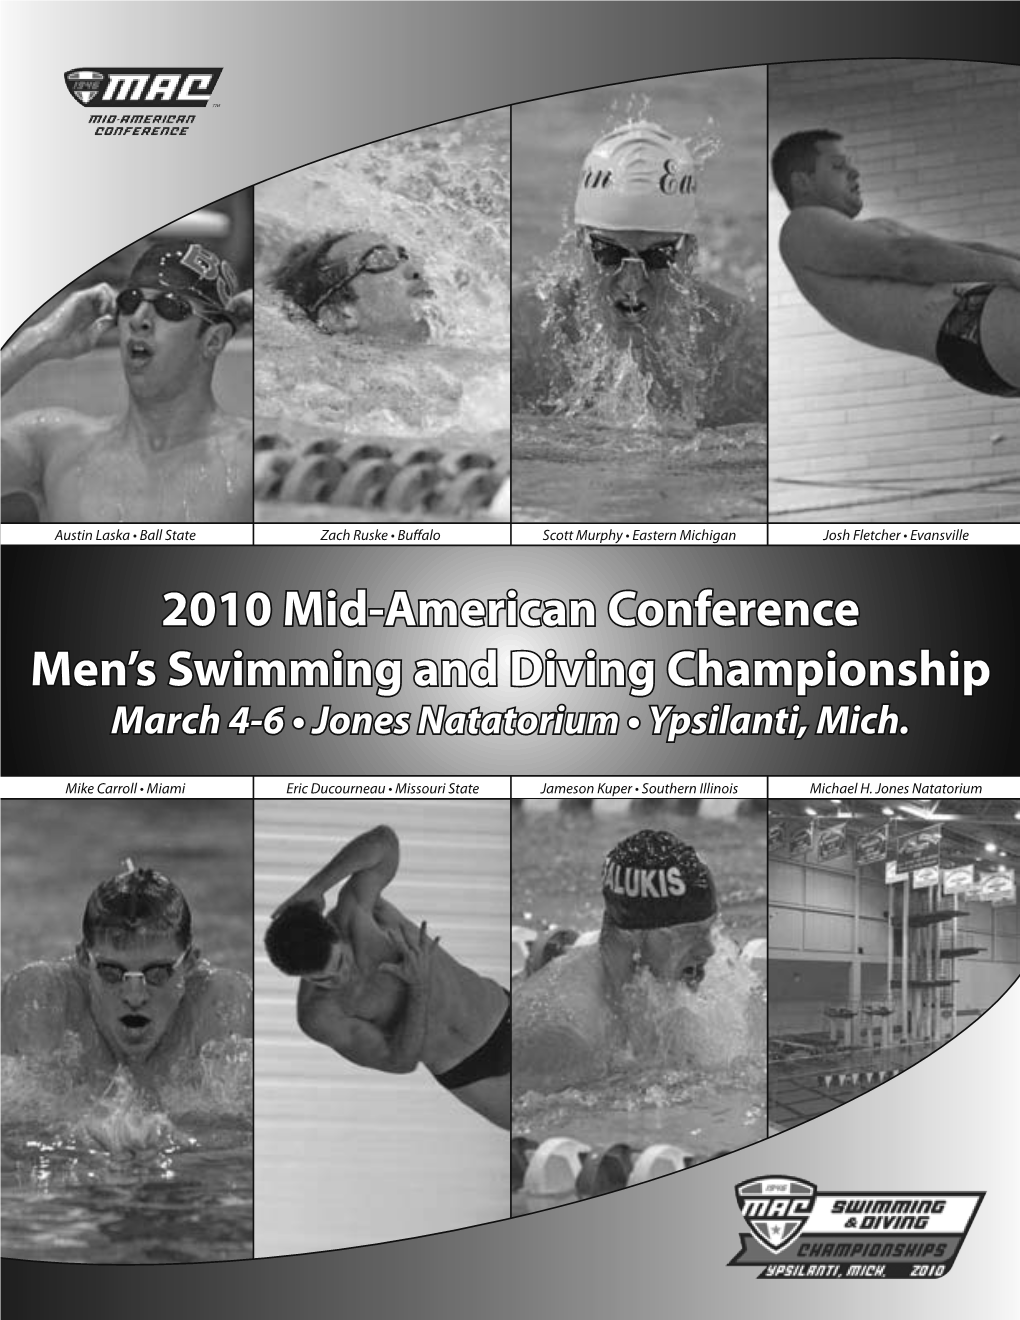 2010 Mid-American Conference Men's Swimming and Diving Championship